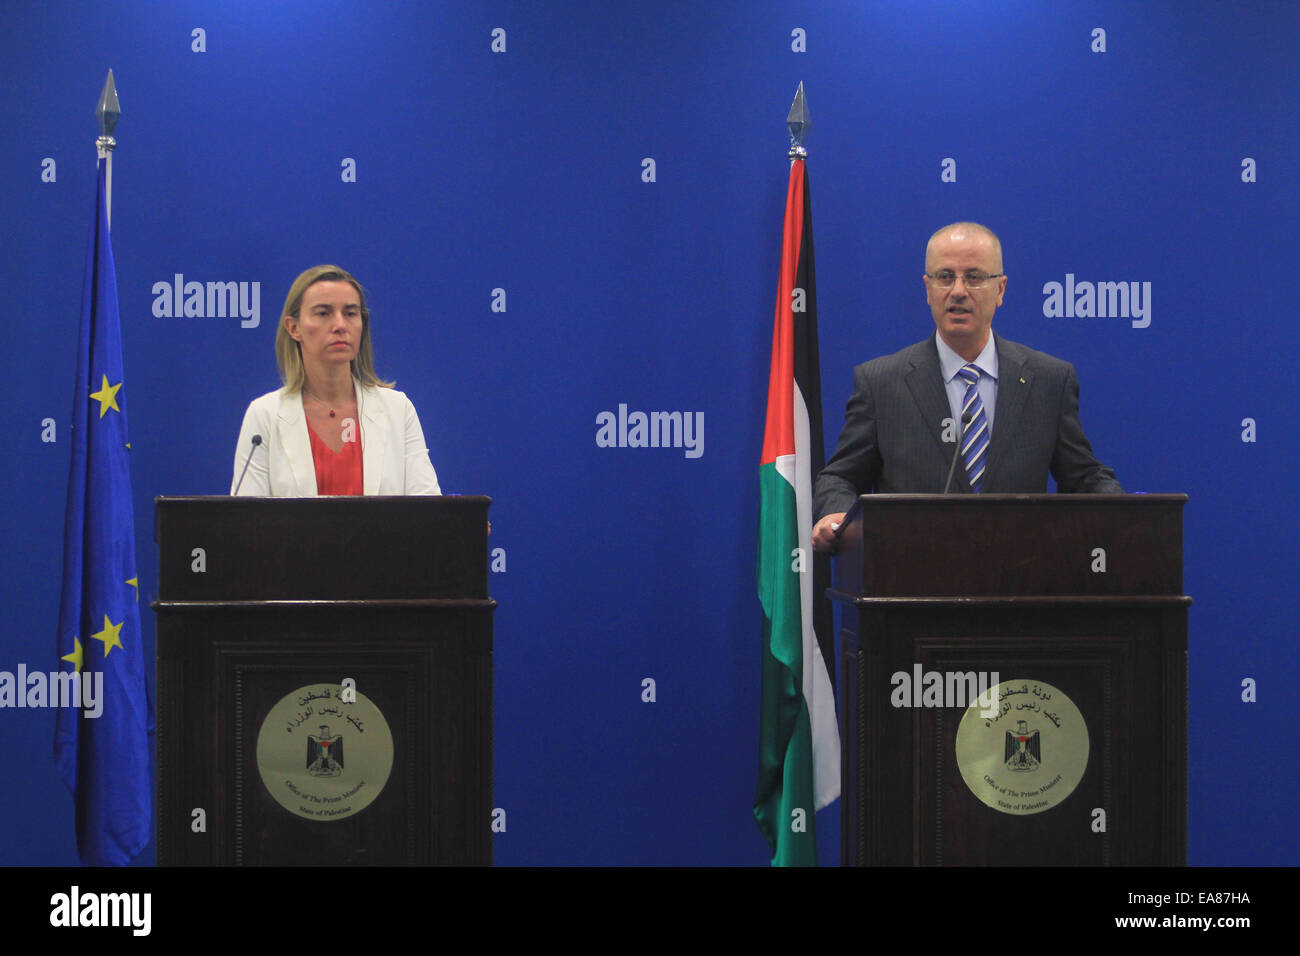 Ramallah. 8th Nov, 2014. Palestinian National Authority Prime Minister Rami Hamdallah (R) speaks during a joint press conference with European Union (EU) foreign policy chief Federica Mogherini in the West Bank City of Ramallah, on Nov. 8, 2014. Federica Mogherini visited the Gaza Strip on Saturday, and called for an immediate start of the reconstruction in the coastal enclave. Credit:  Fadi Arouri/Xinhua/Alamy Live News Stock Photo